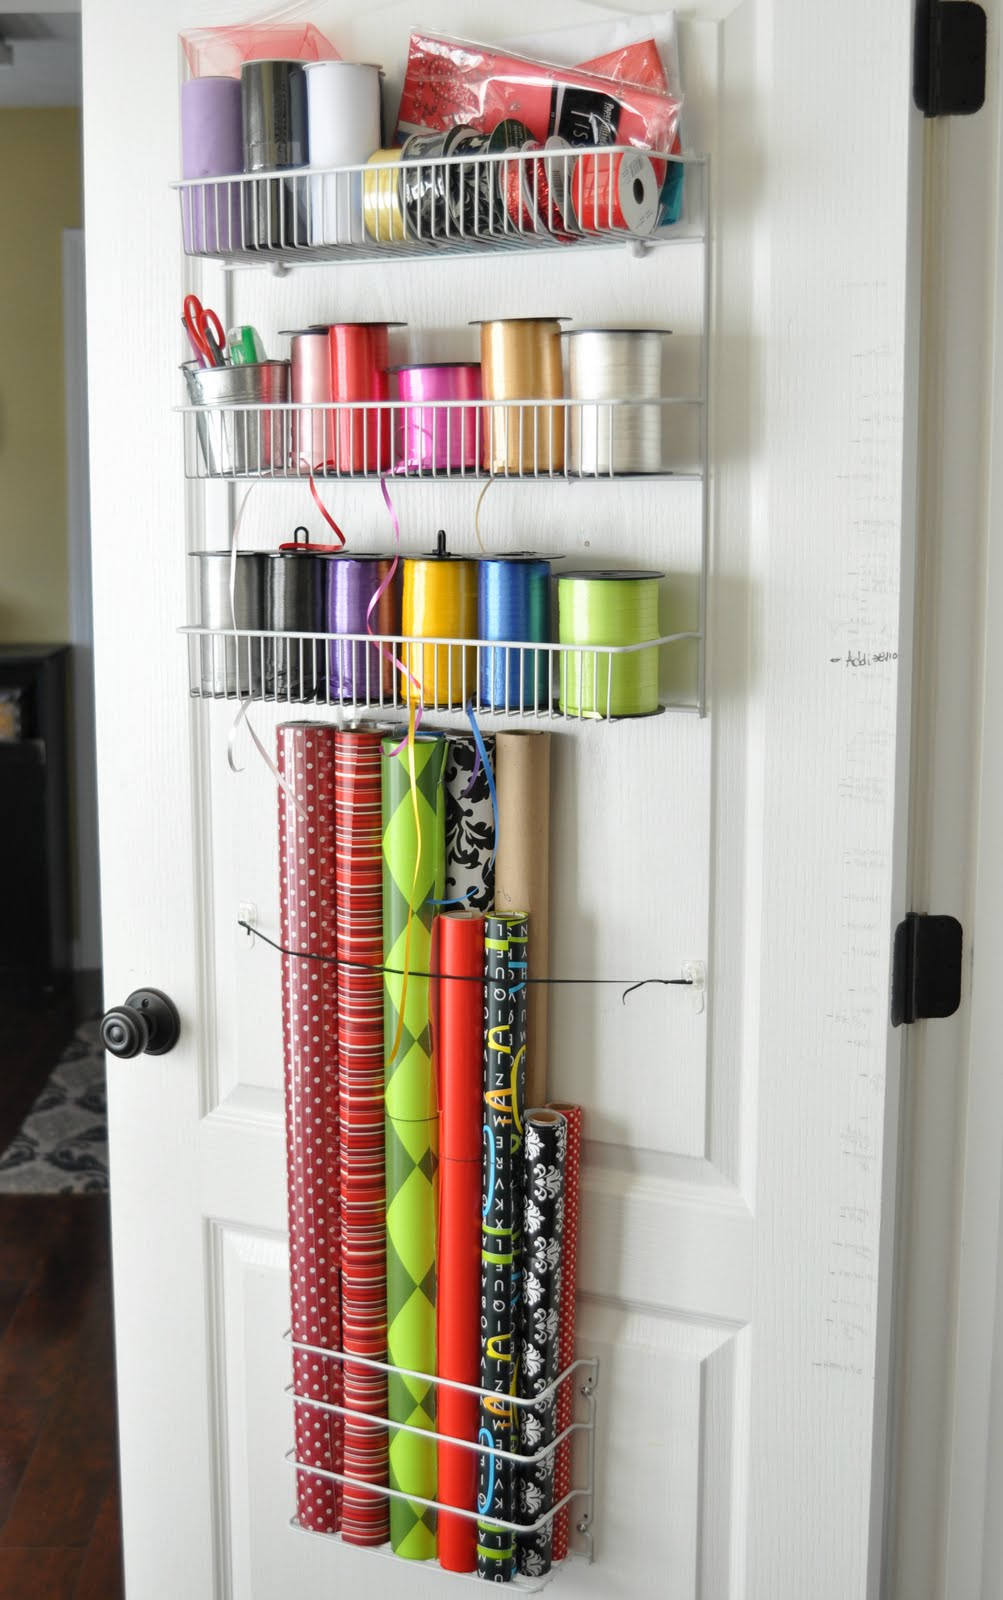 Wrapping Paper organizer Awesome Wrapping Paper Storage solutions that Keep the Clutter